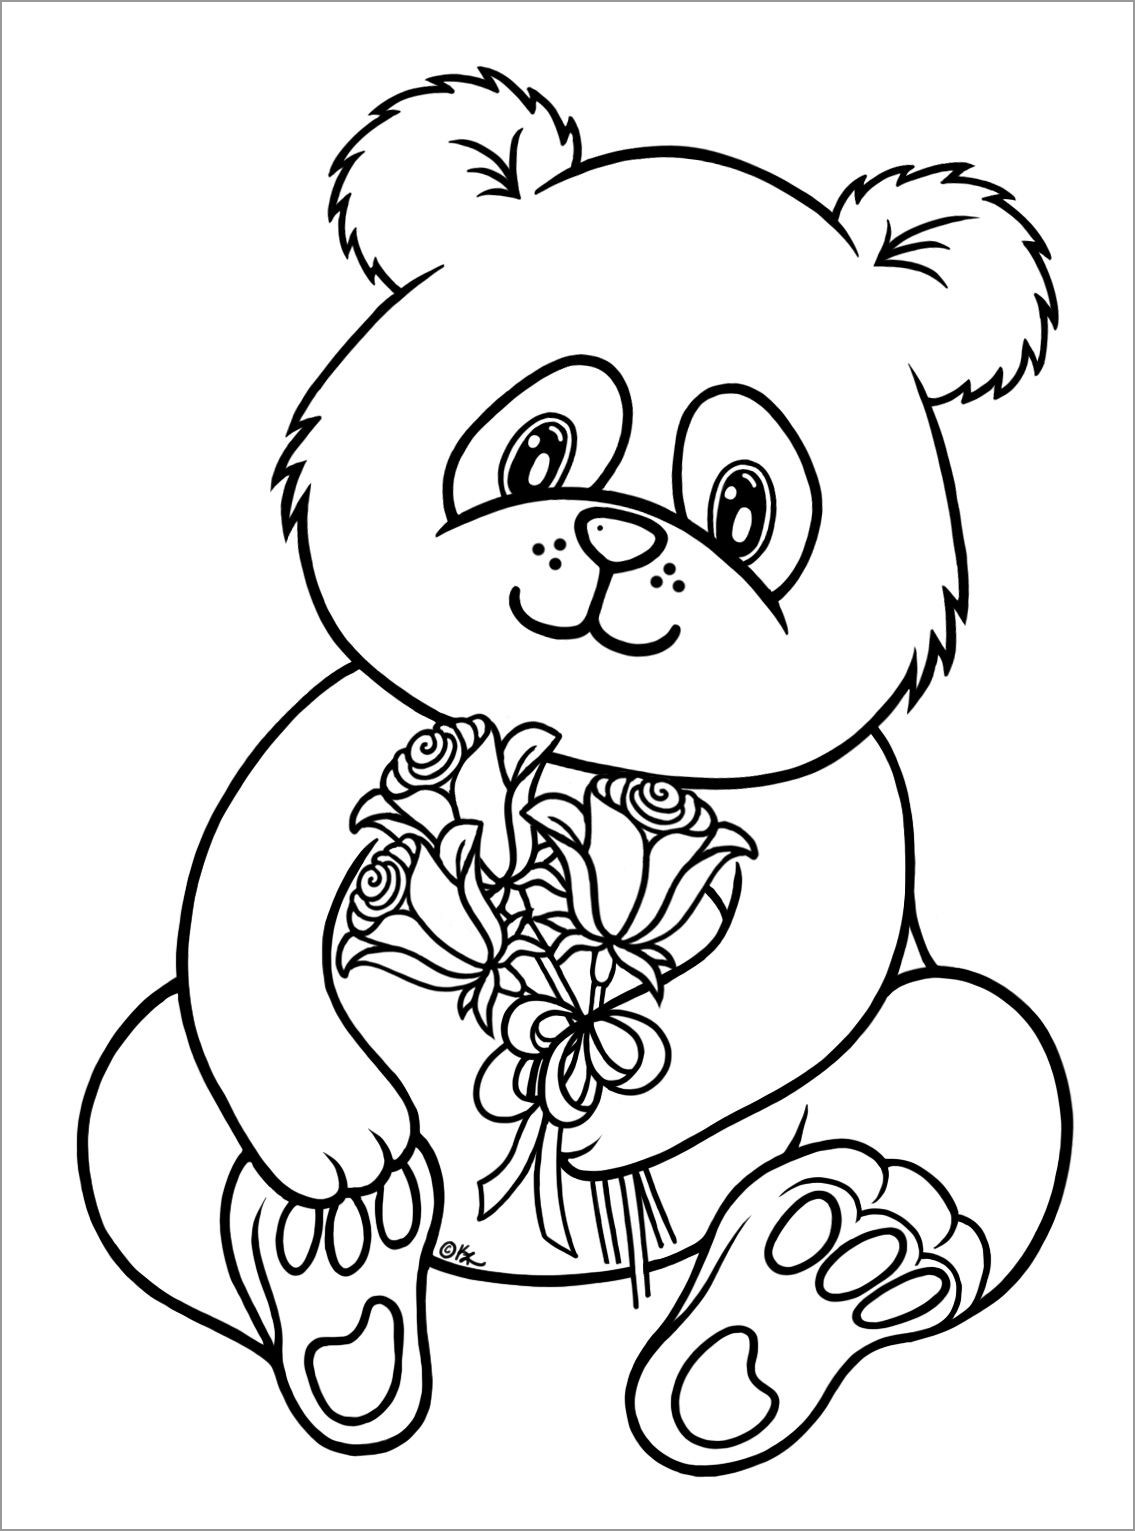 Cute Baby Panda Coloring Pages To Print Coloringbay Coloring Home